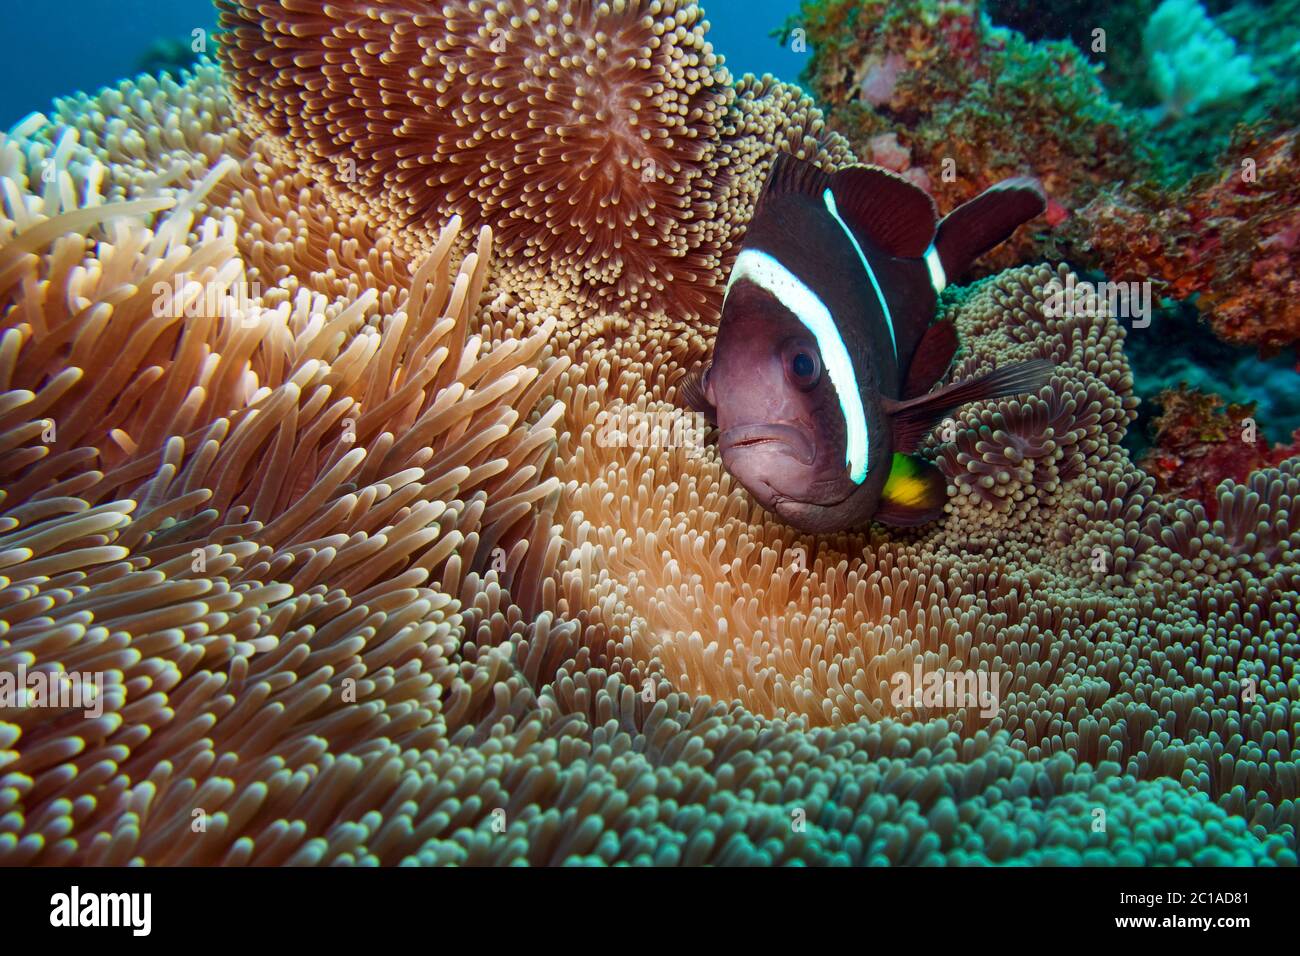 Maurizio - anemonefish Amphiprion chrysogaster Foto Stock